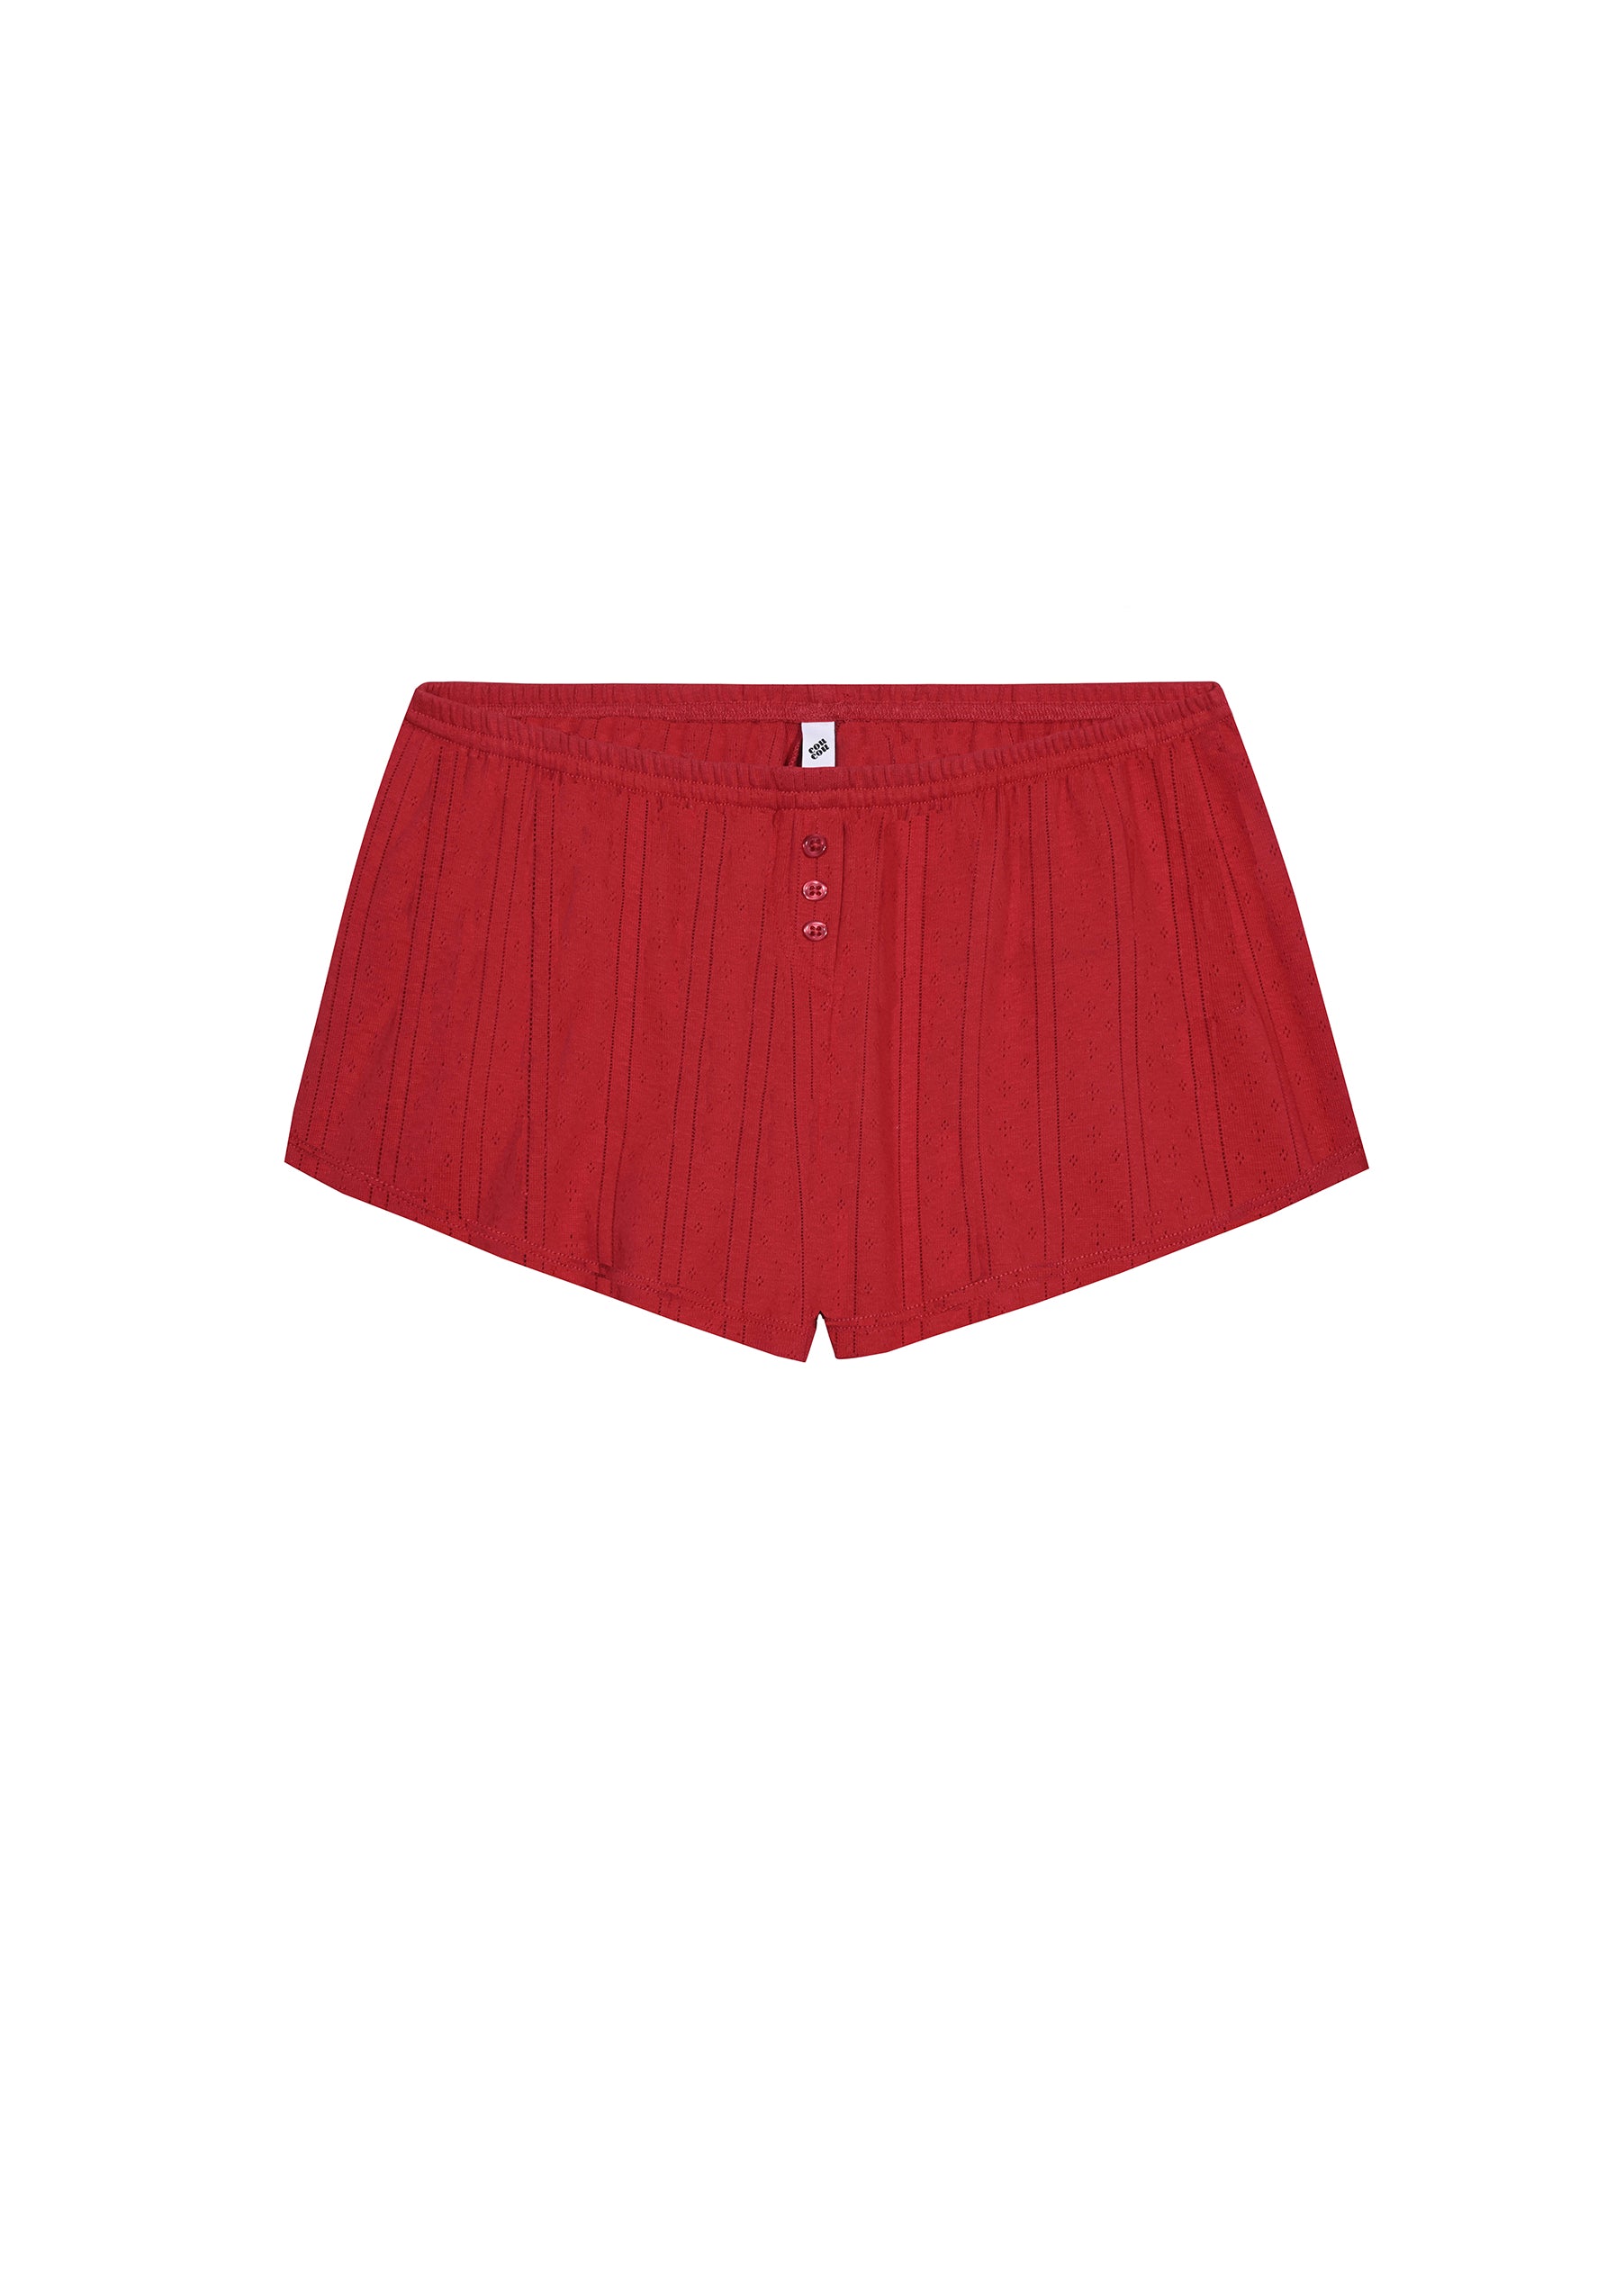 The Short Cherry Red